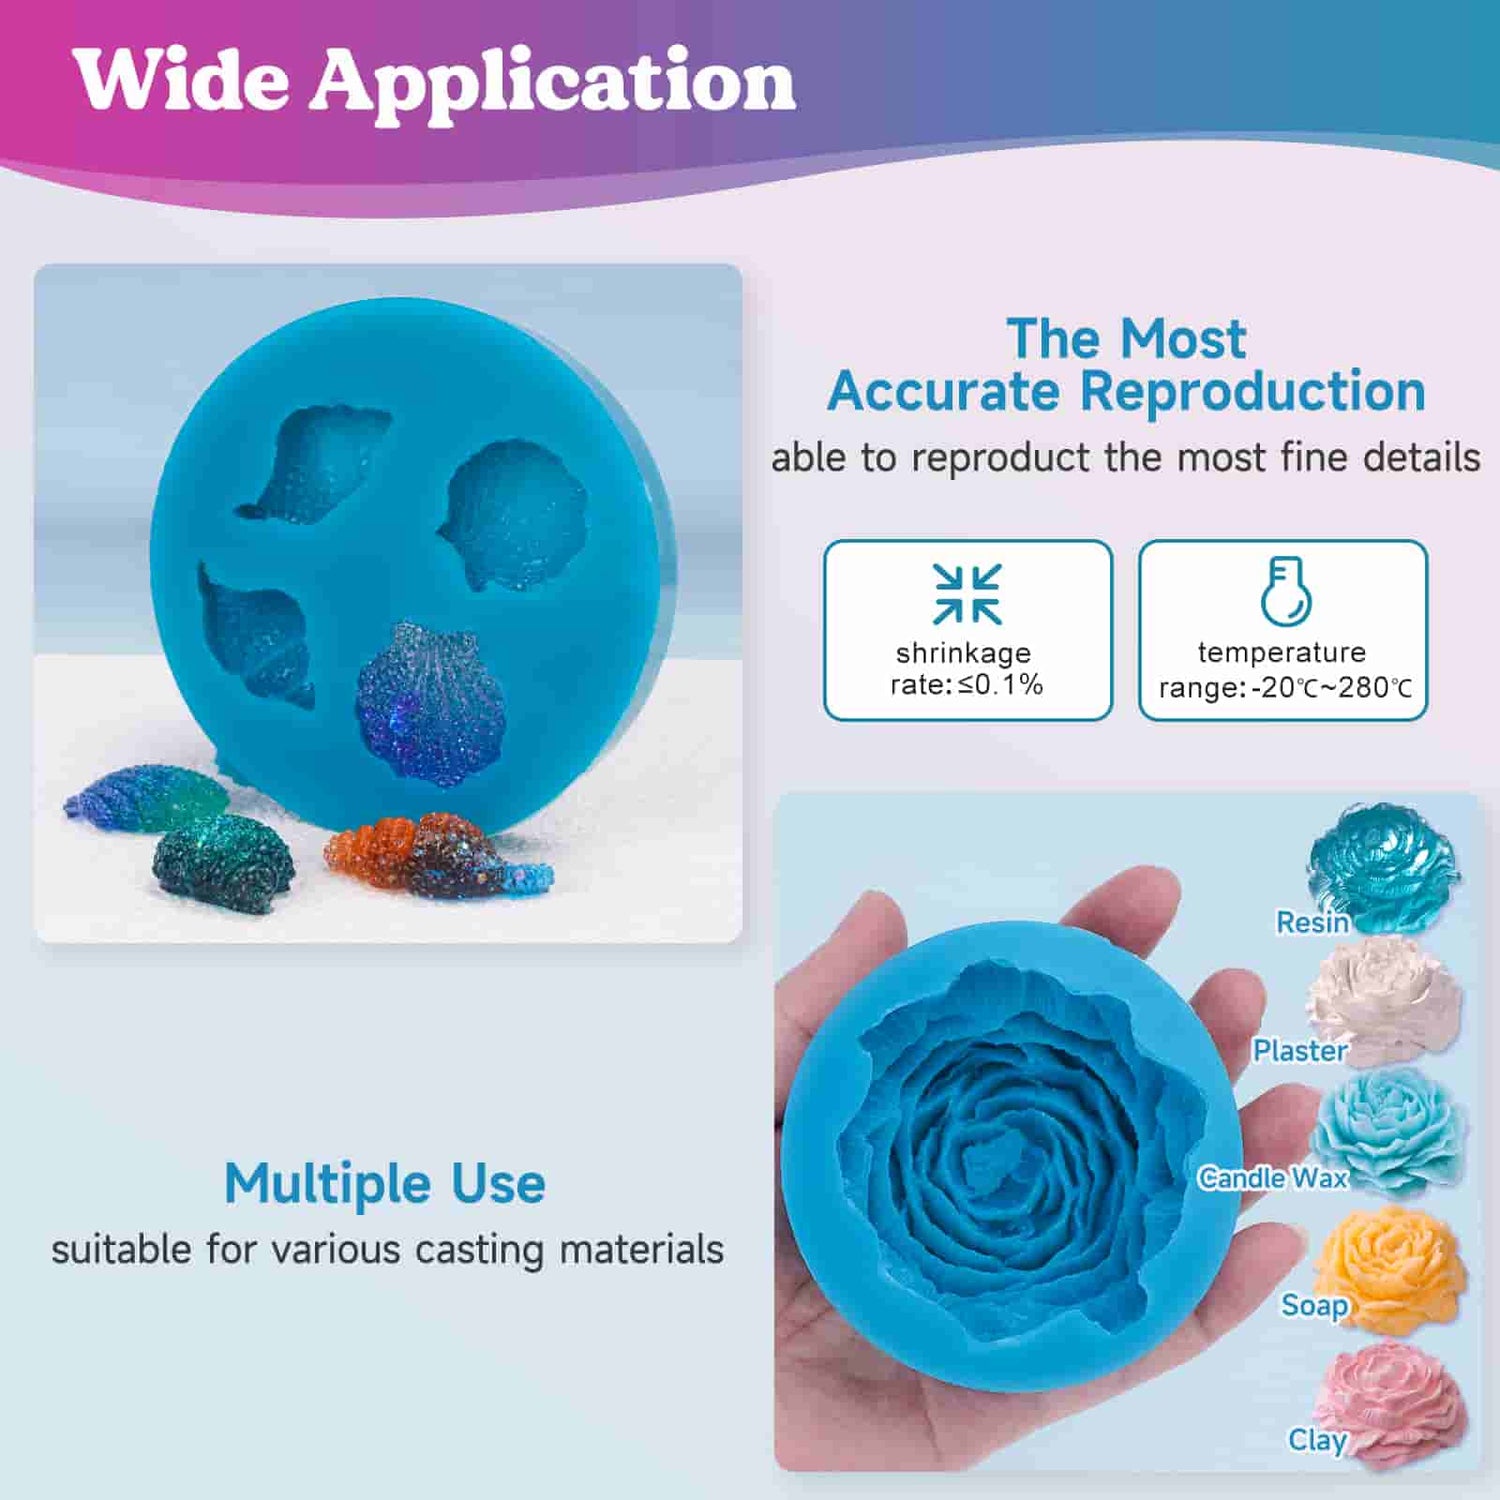 LET'S RESIN Silicone Mold Making Kit, 30A Liquid Silicone Rubber, 32 oz  Non-Toxic, Odorless - 1:1 Mixing Ratio Silicone for DIY Resin Mold, Casting,  Candle Making Molds, Soap Making Molds(Blue) – Let's Resin